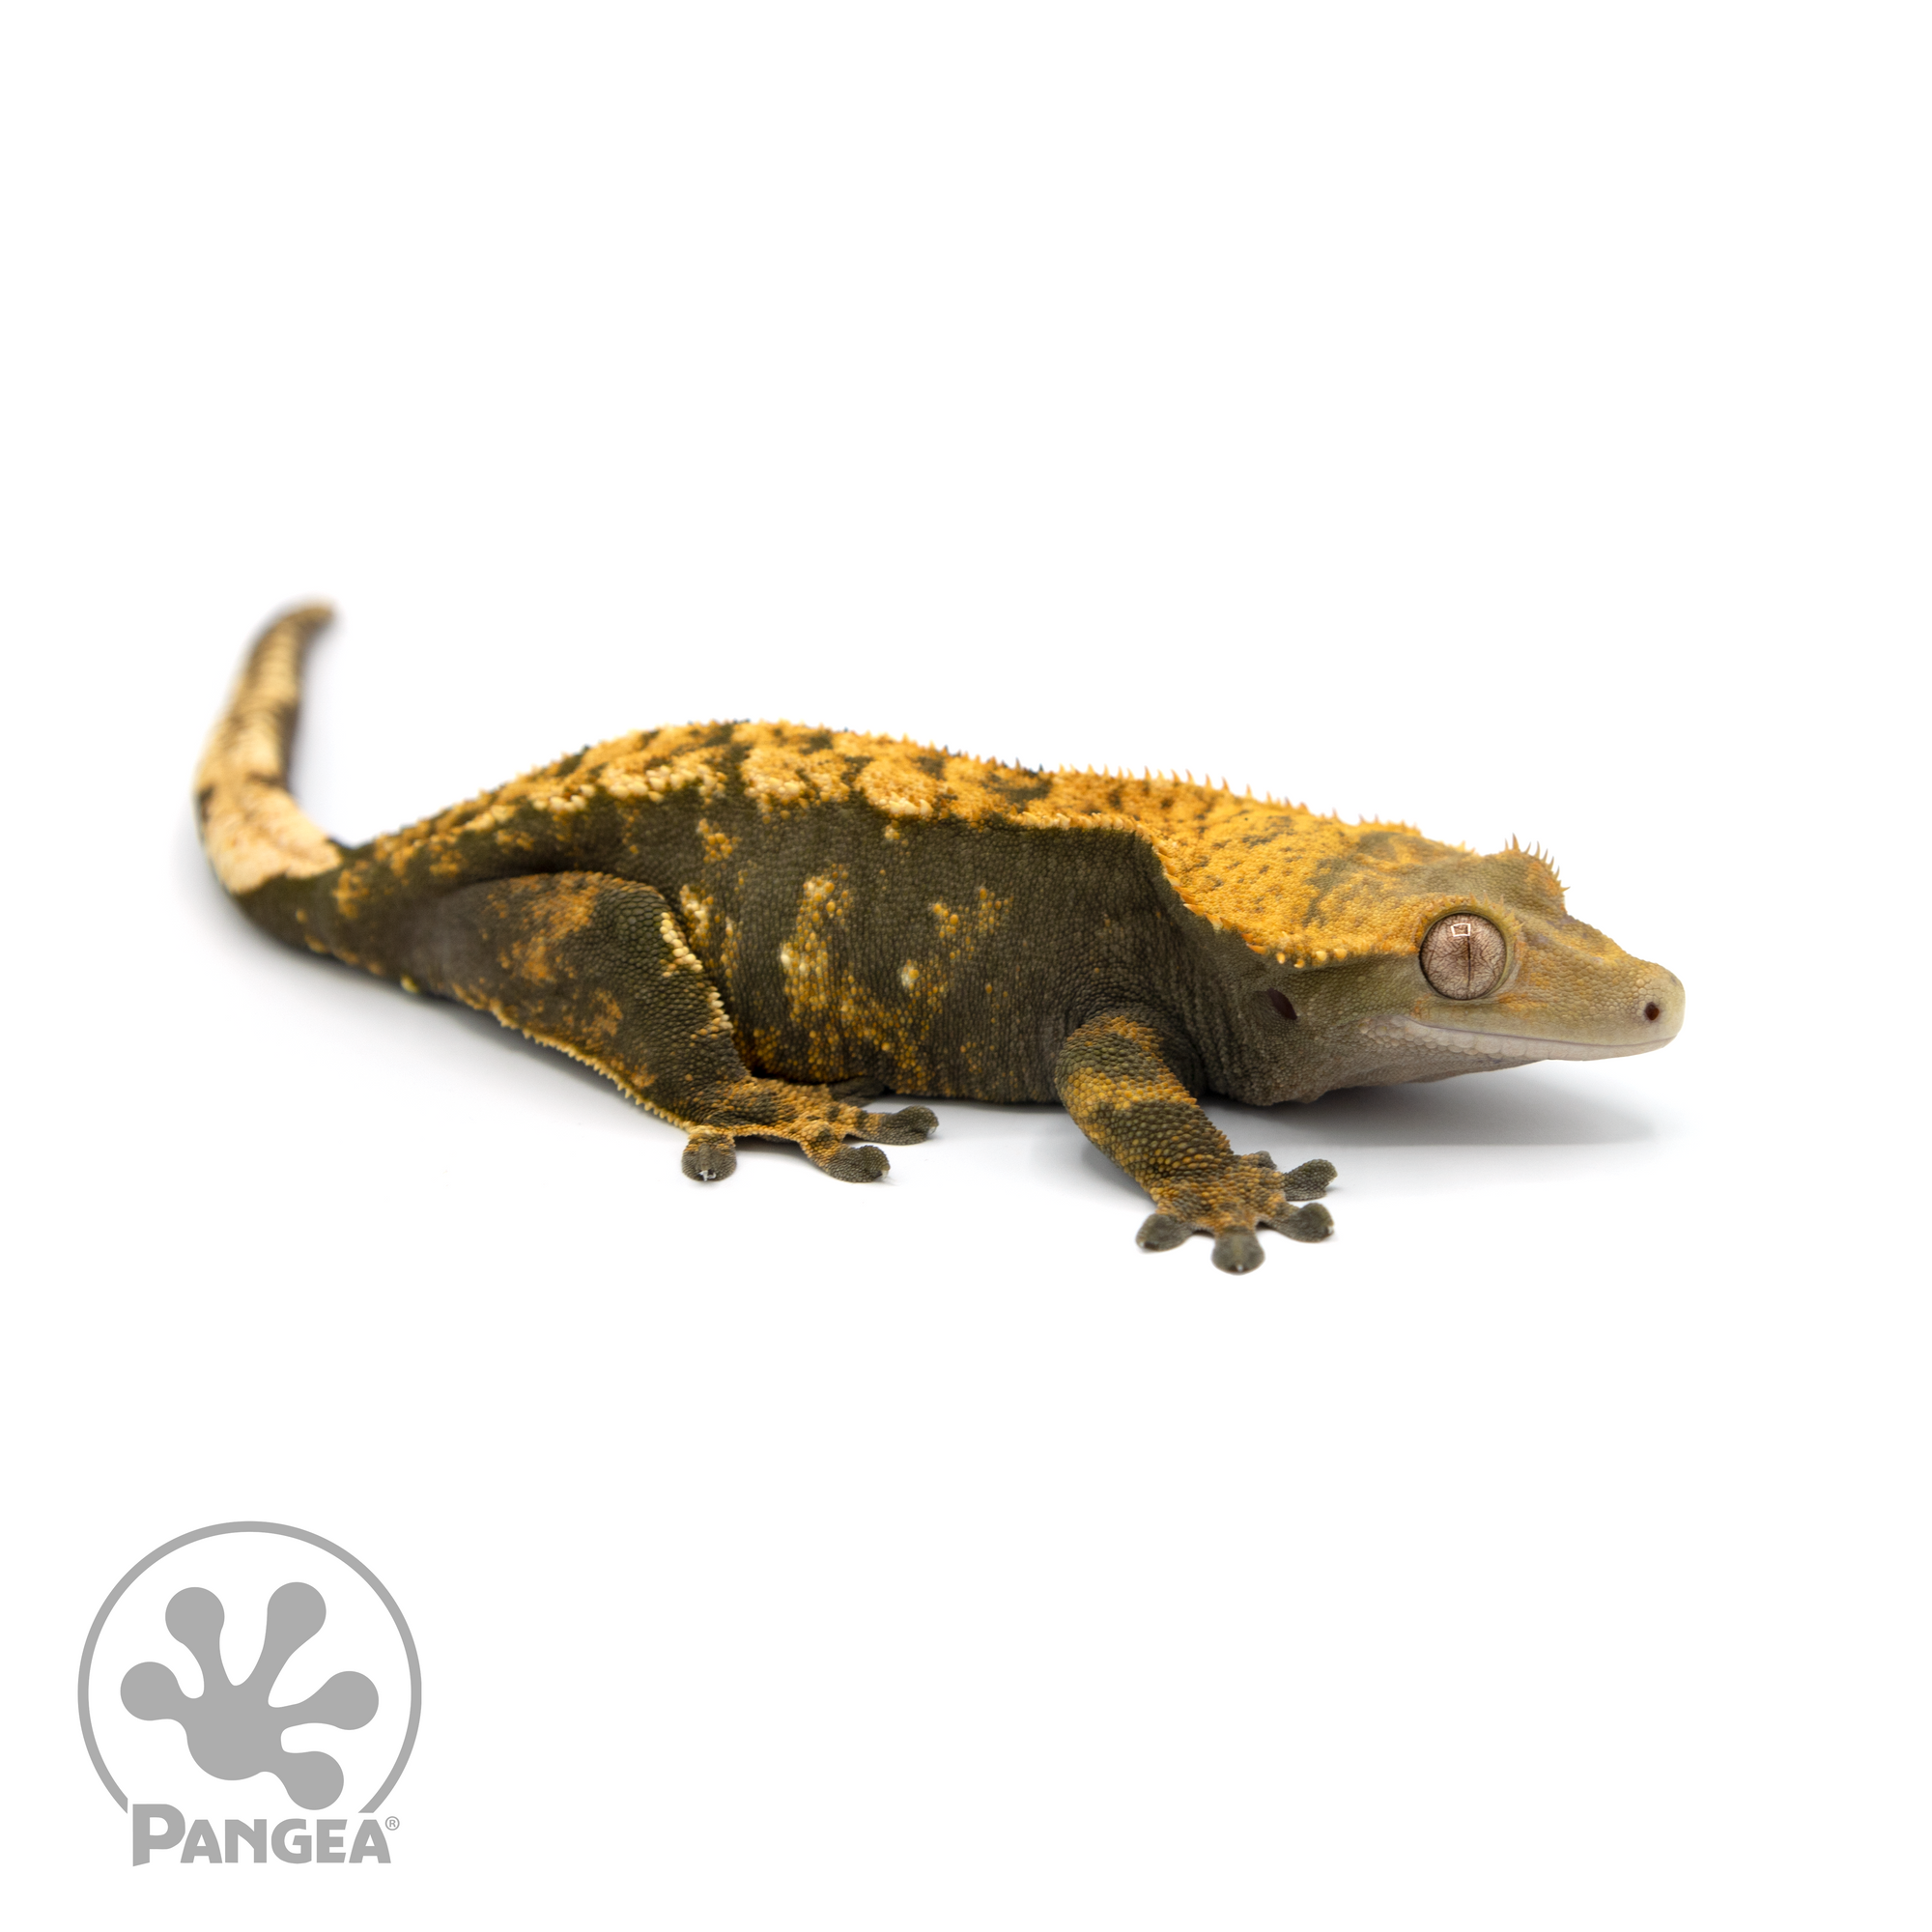 Female Harlequin Crested Gecko Cr-1392 looking right